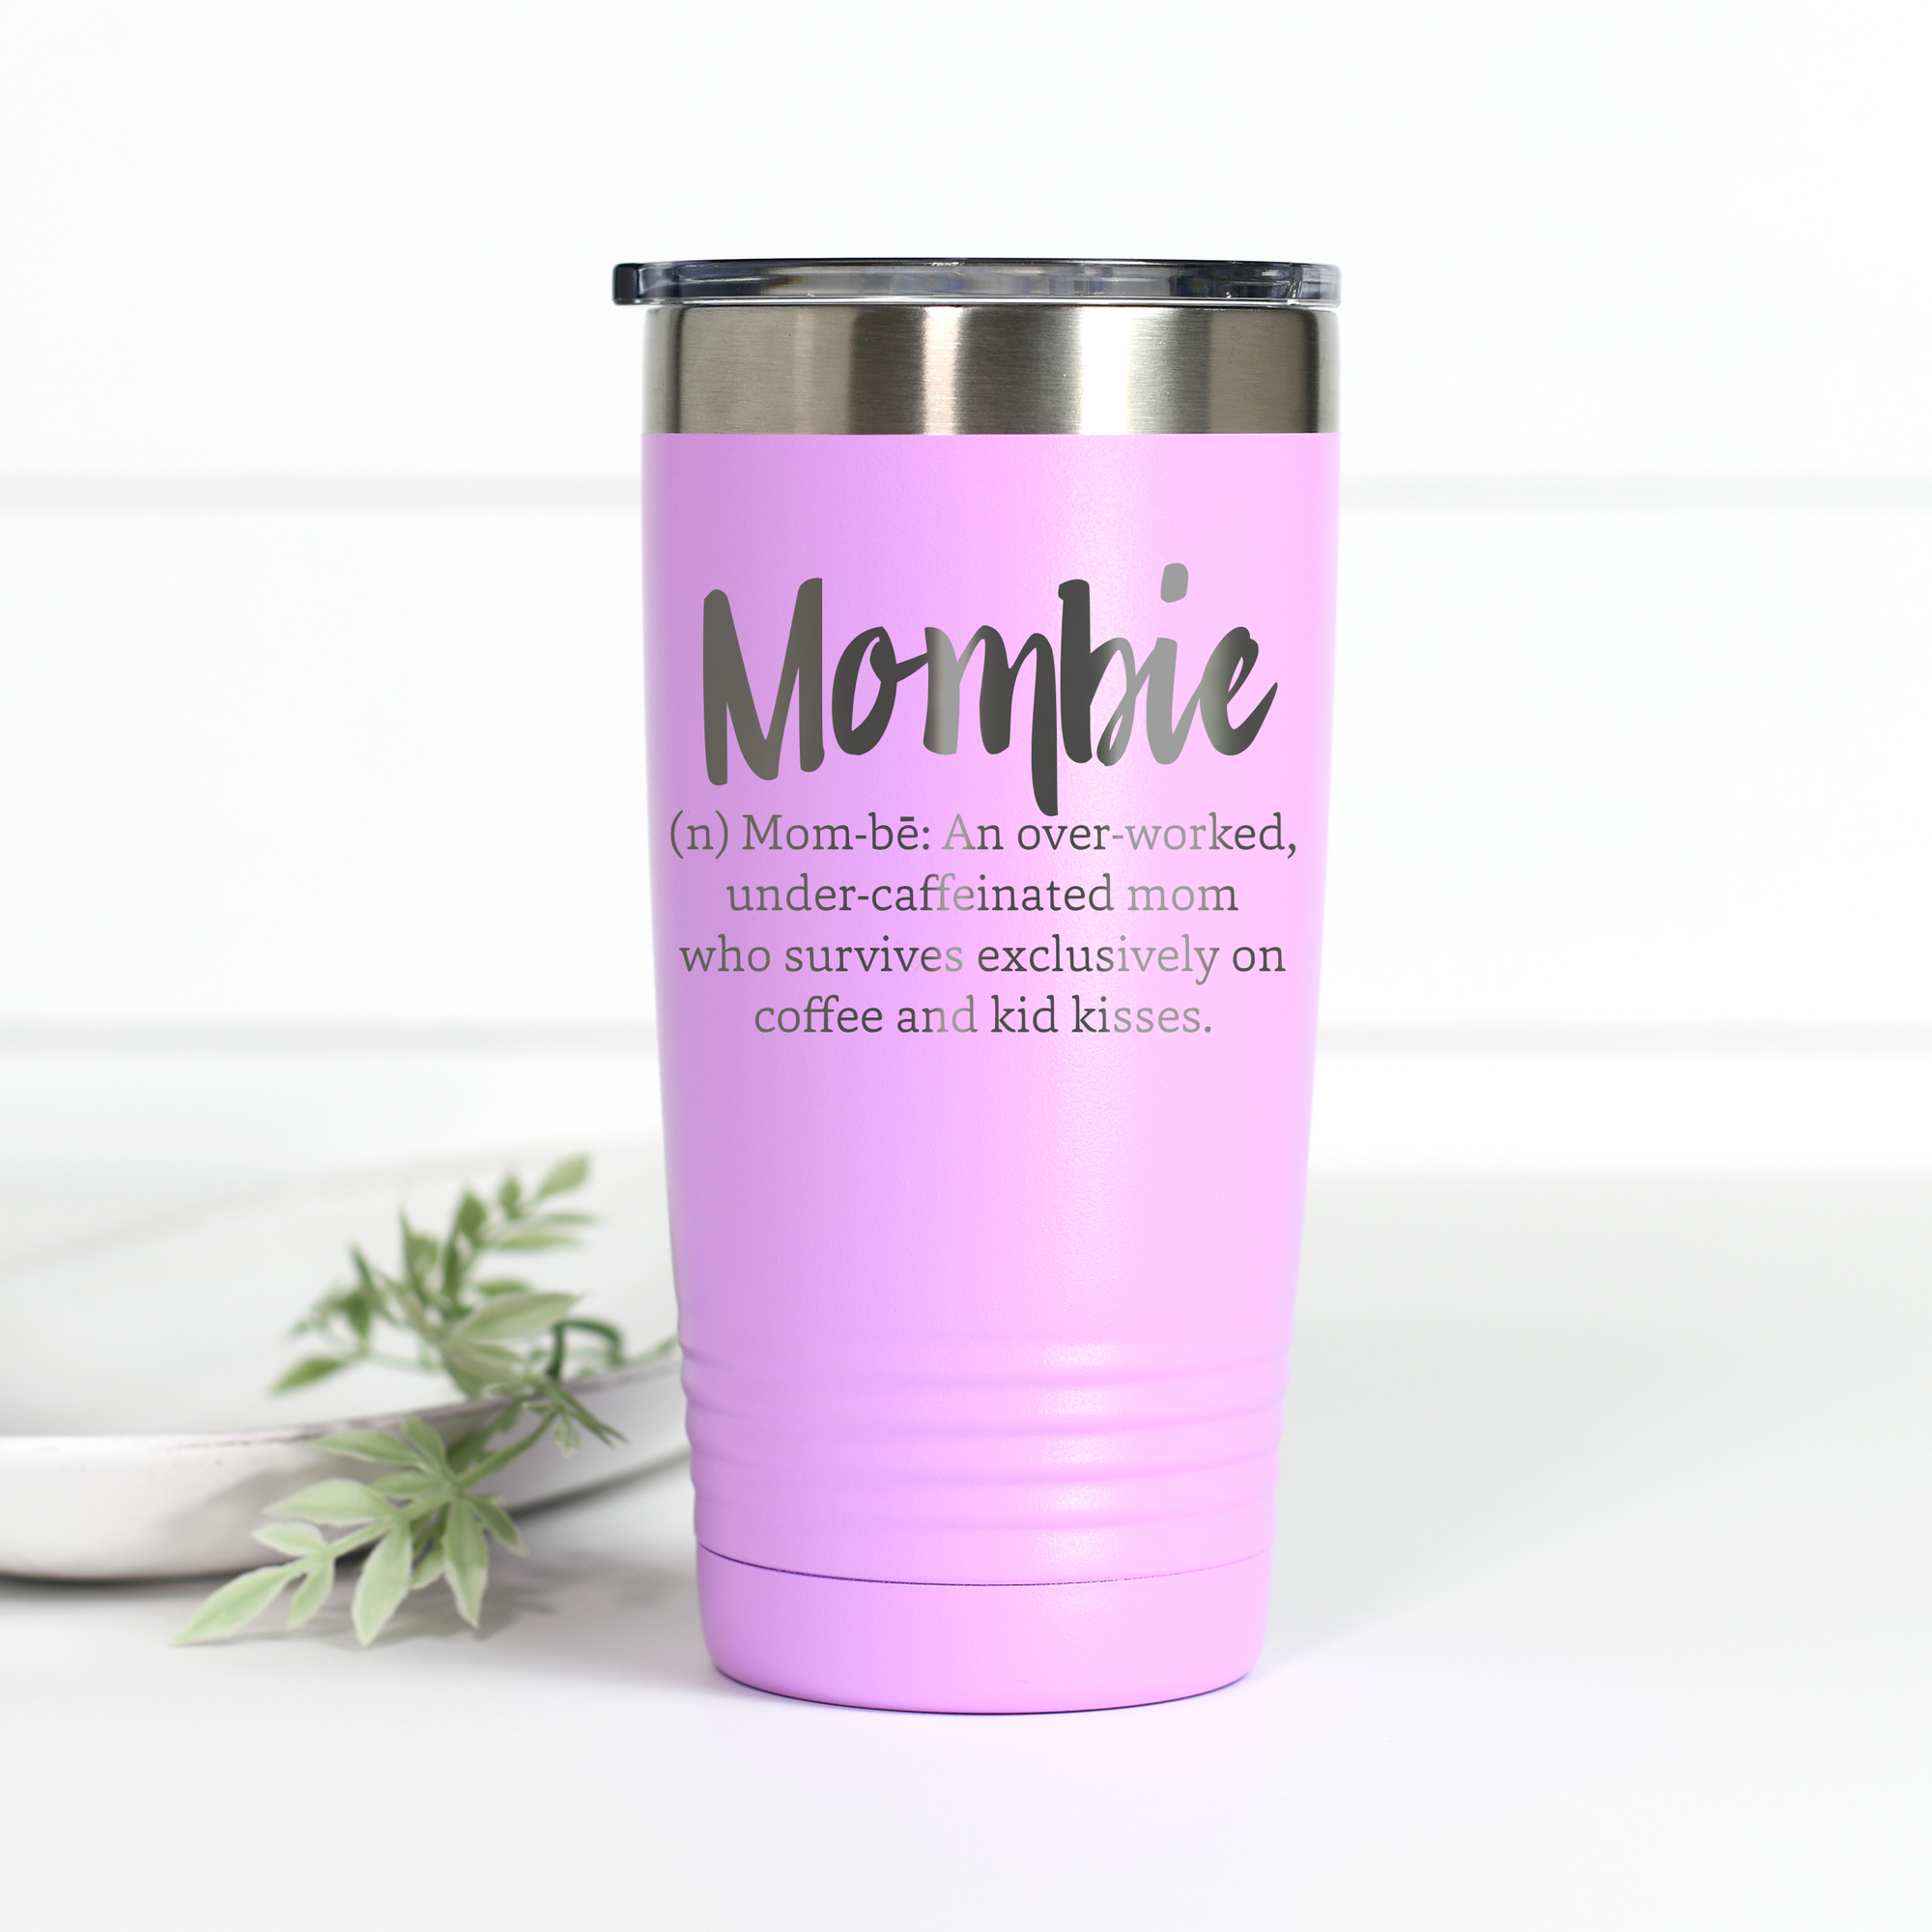 This Is My Circus These Are My Monkeys Tumbler Funny Mom Travel Mug Gift  Insulated Laser Engraved Coffee Cup Mother's Day 20 oz – CarveBright